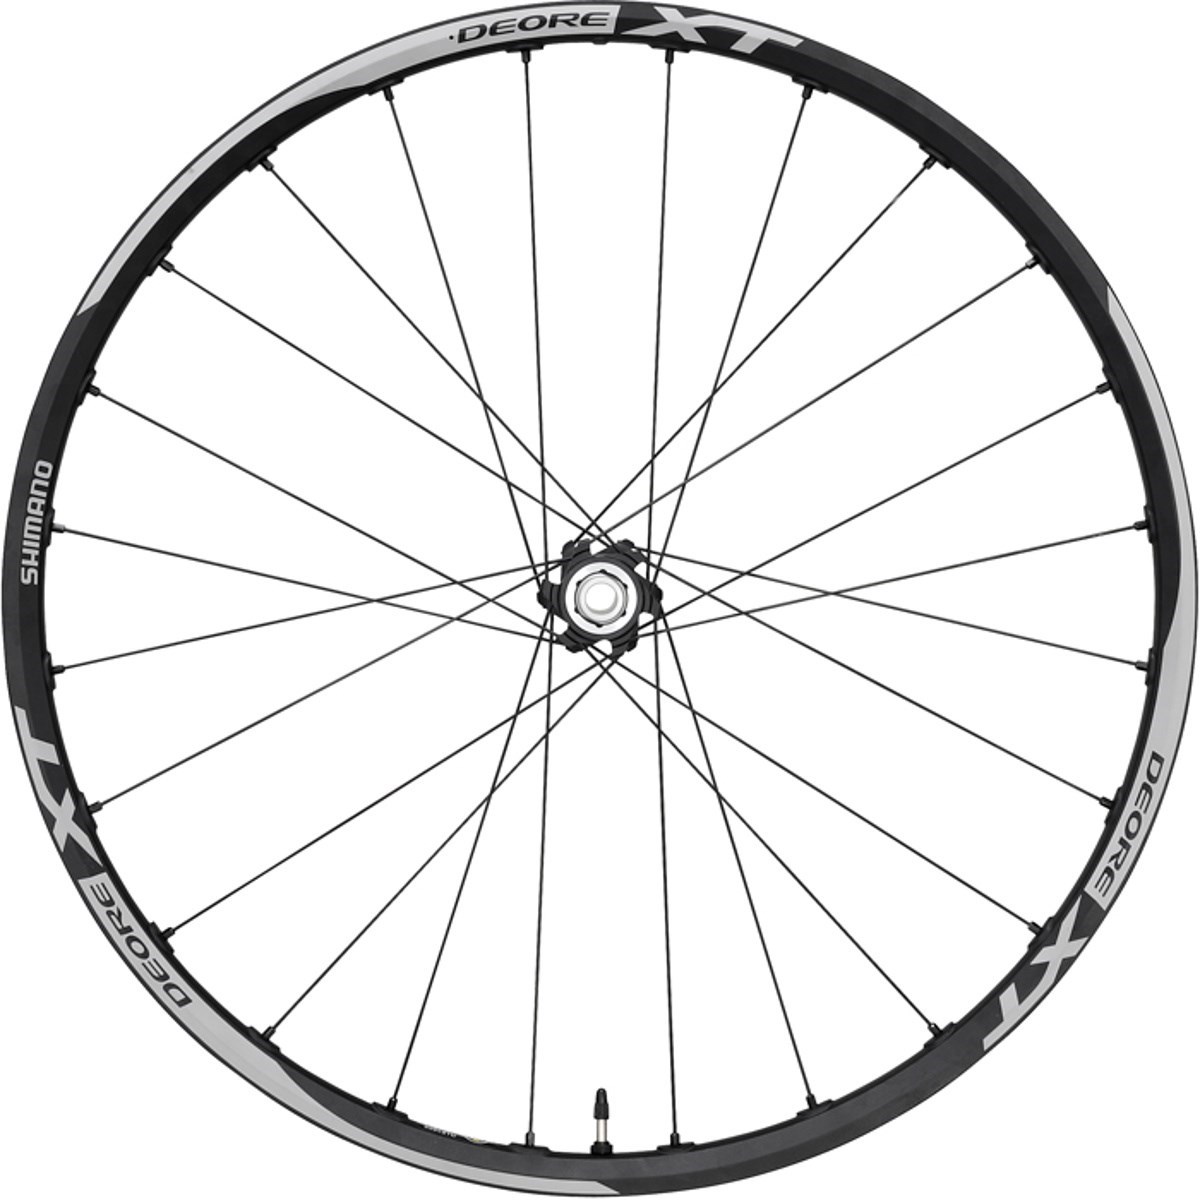 Shimano WH-M788 XT 15mm Front MTB Wheel product image